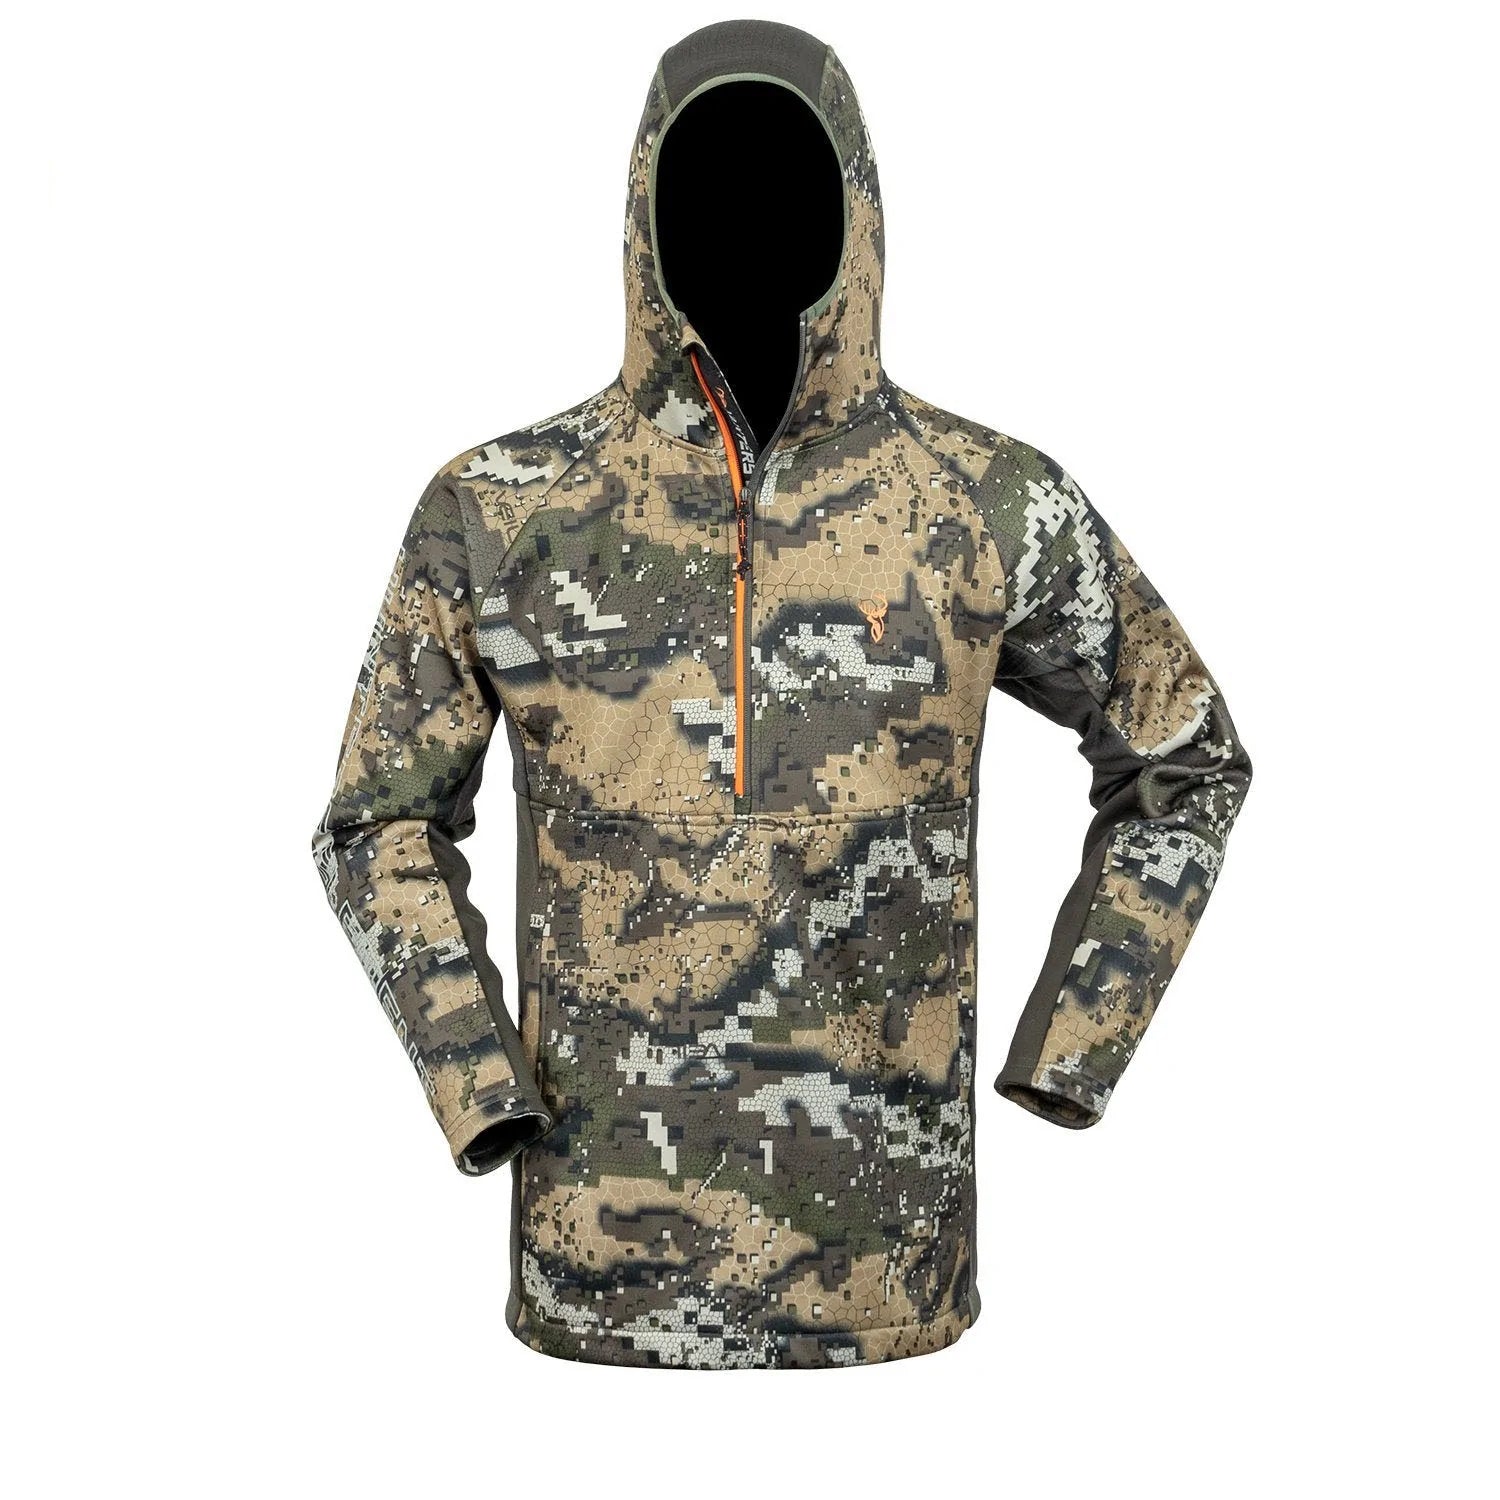 Hunters Element Zenith Hood - Desolve Veil -  - Mansfield Hunting & Fishing - Products to prepare for Corona Virus